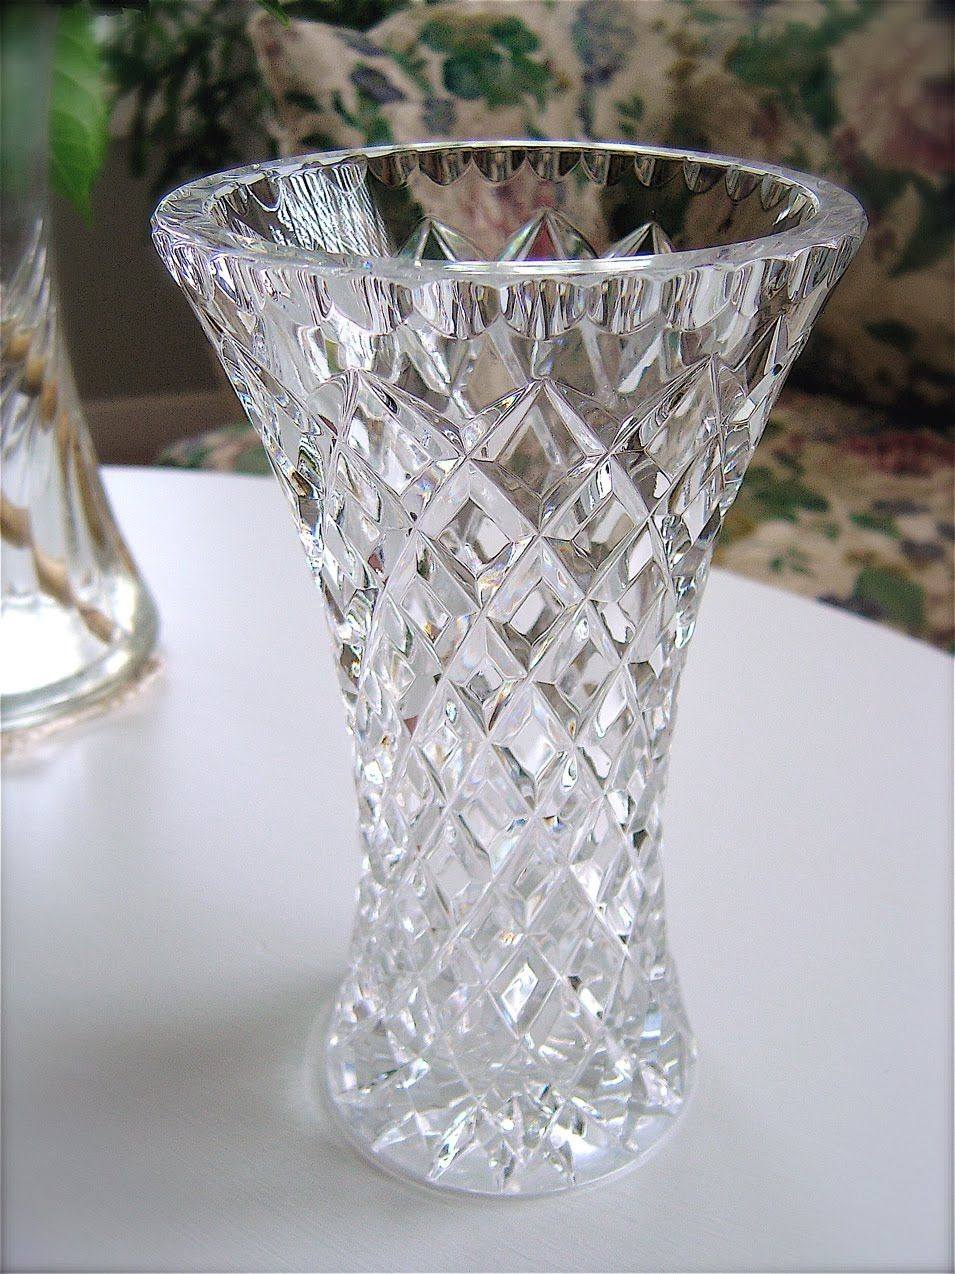 16 Lovely Cristal D Arques Lead Crystal Vase 2024 free download cristal d arques lead crystal vase of crystal vases for sale vase pinterest crystal vase and crystals with regard to 74547ff5034c00424f36cfbda4cb6c74